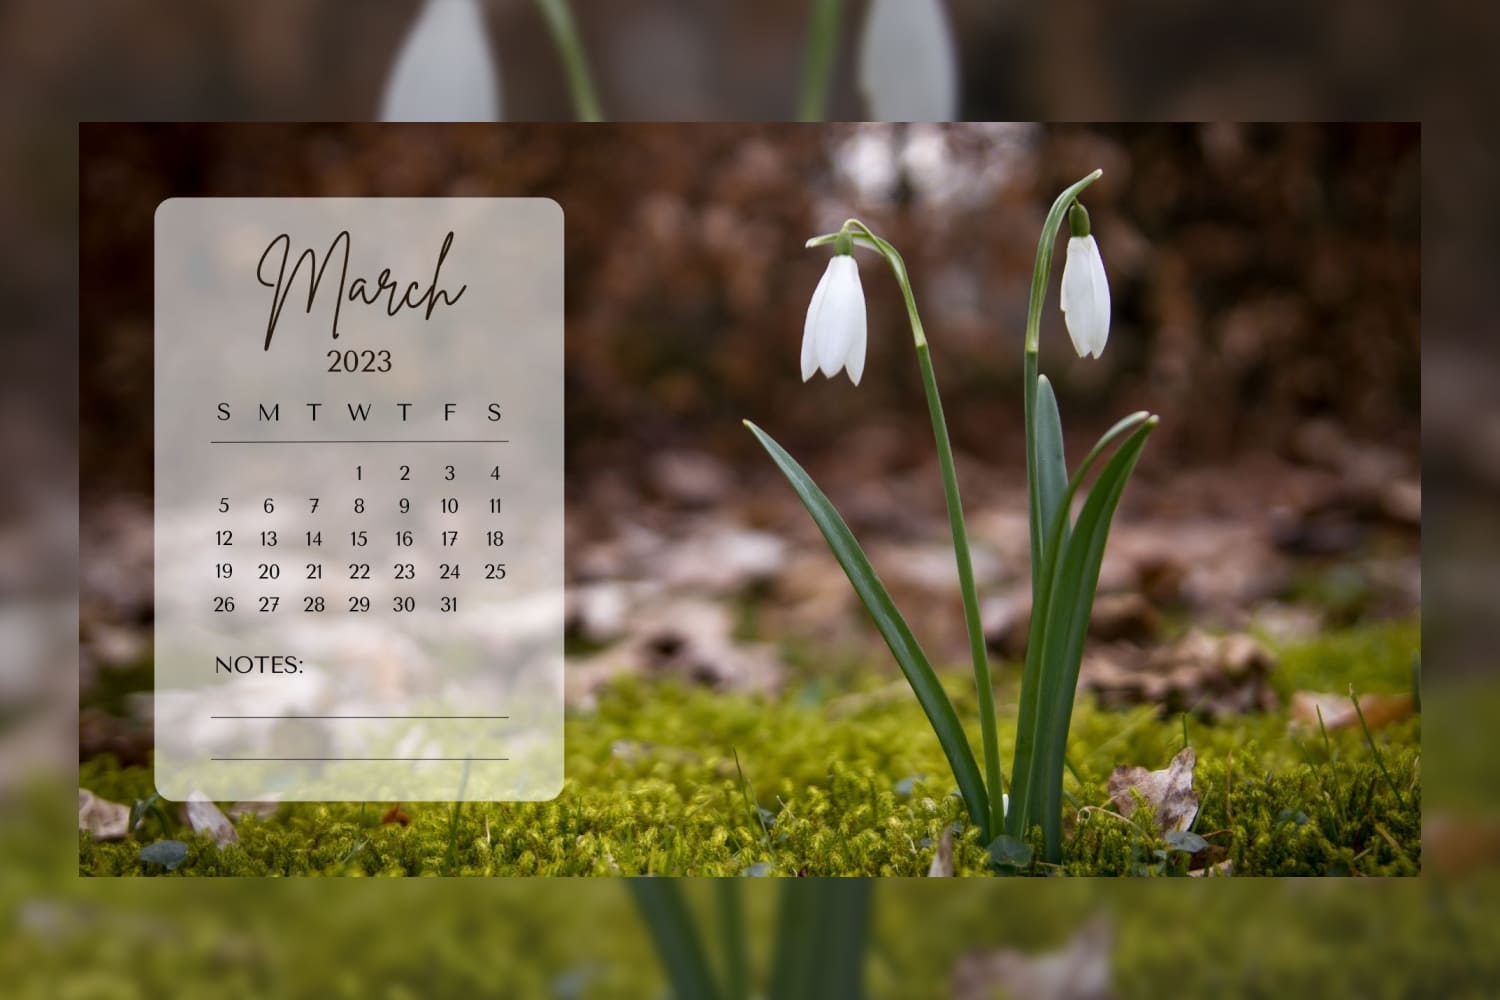 March 2023 desktop calendar wallpaper with green and white color scheme and spring flower.